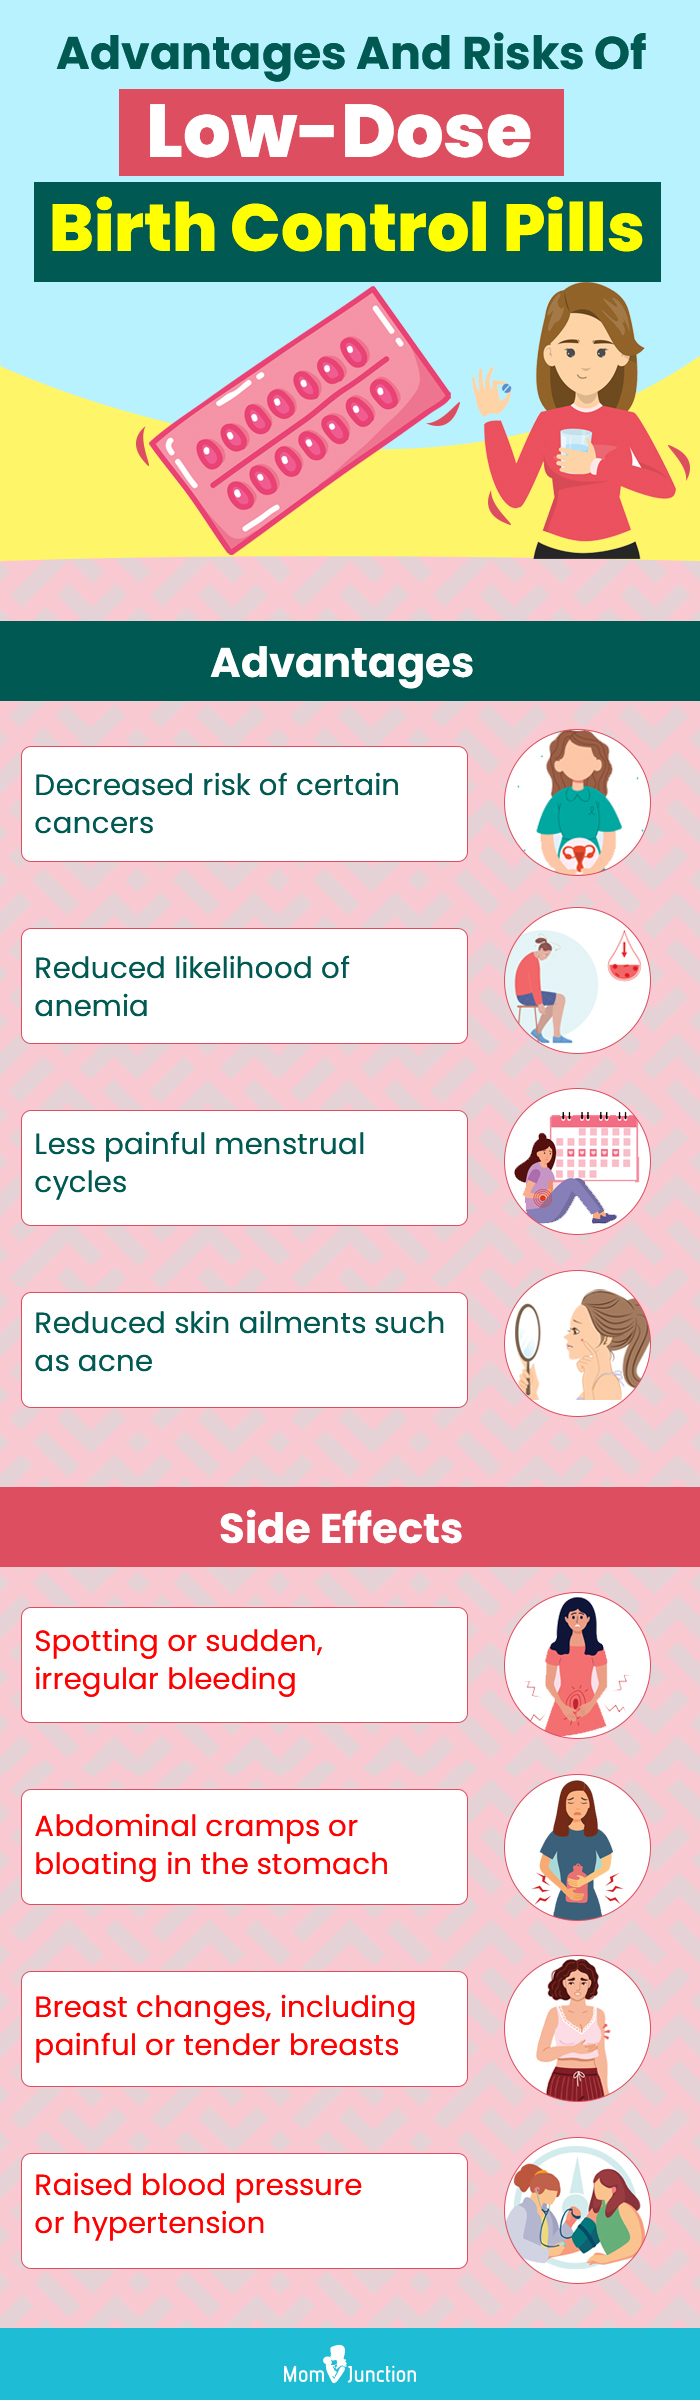 advantages and risks of low dose birth control pills (infographic)